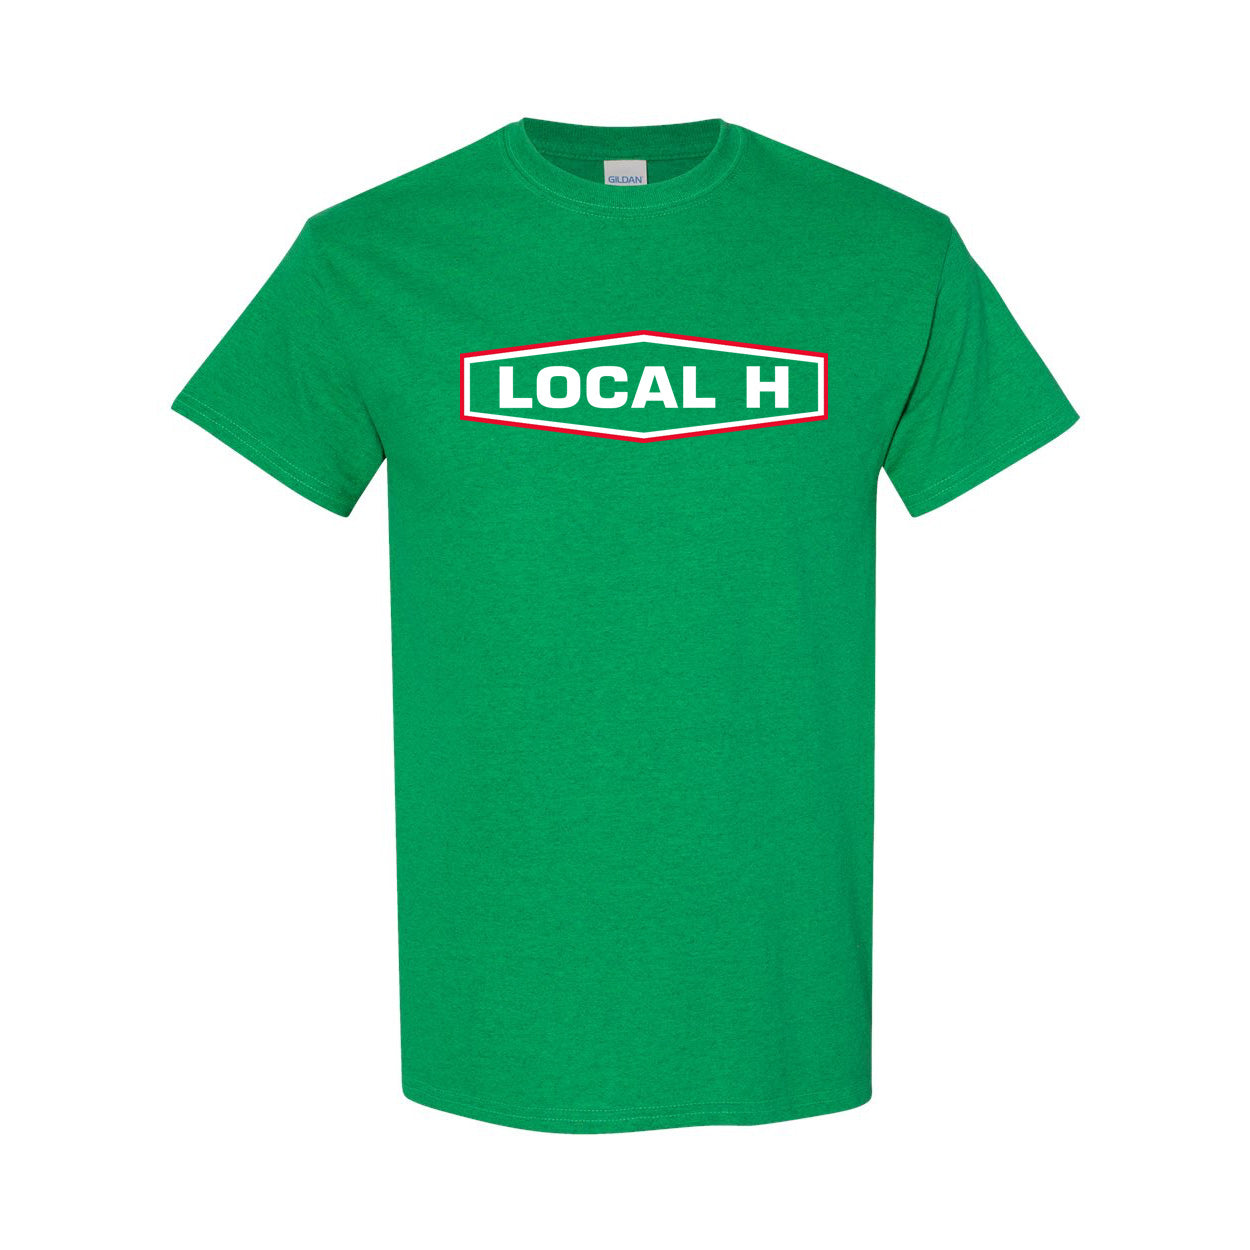 Local H - Tee Shirt - Back To Basics, Baby (Antique Green)